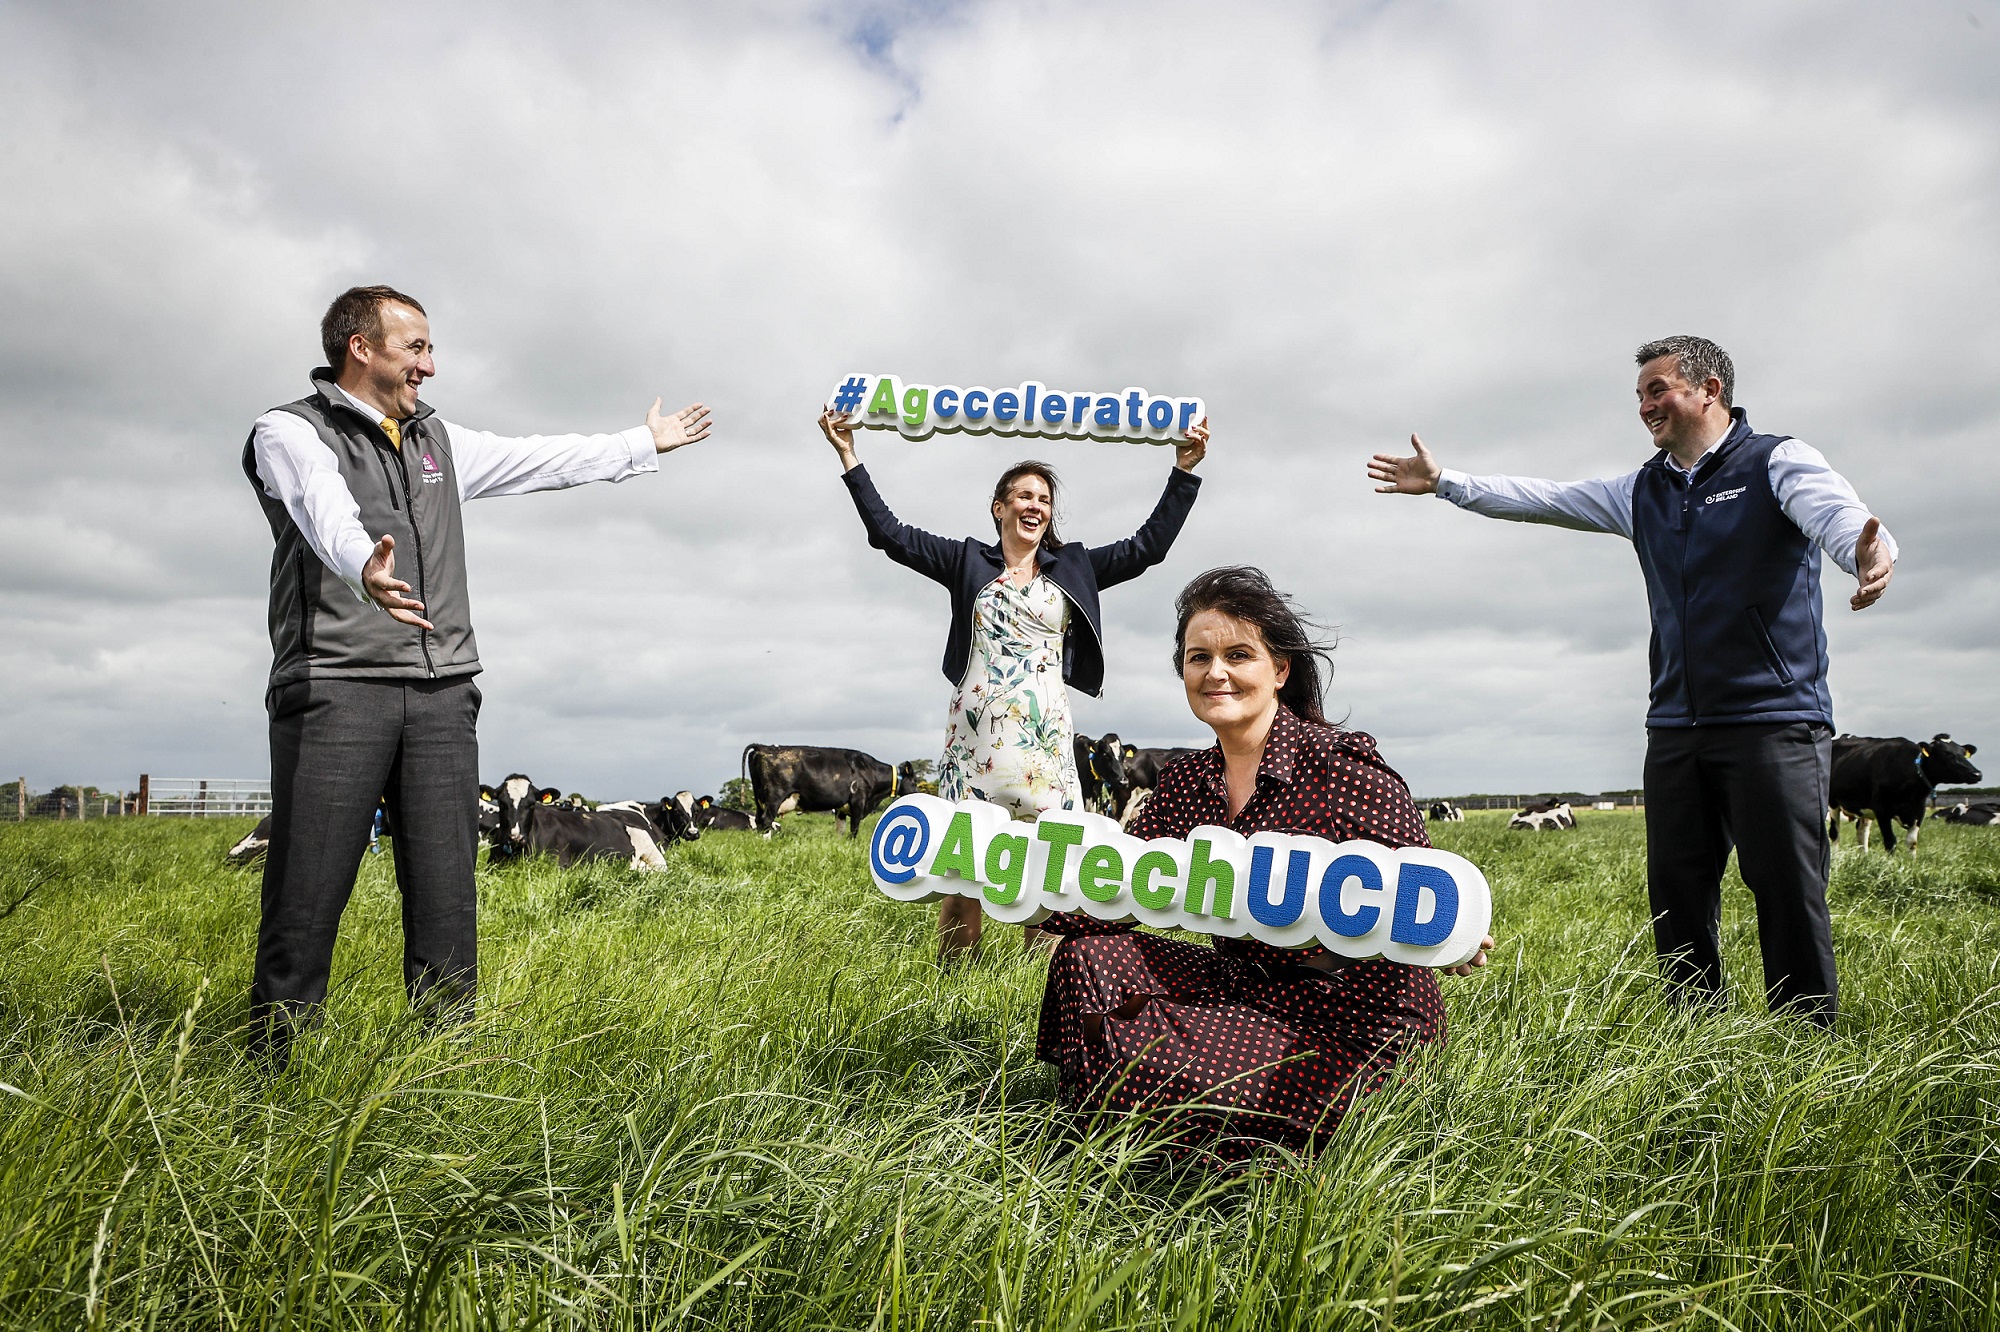 L to R: Shane Whelan - AIB, Nicky Deasy - The Yield Lab, Niamh Collins - AgTechUCD and James Moloney - Enterprise Ireland.